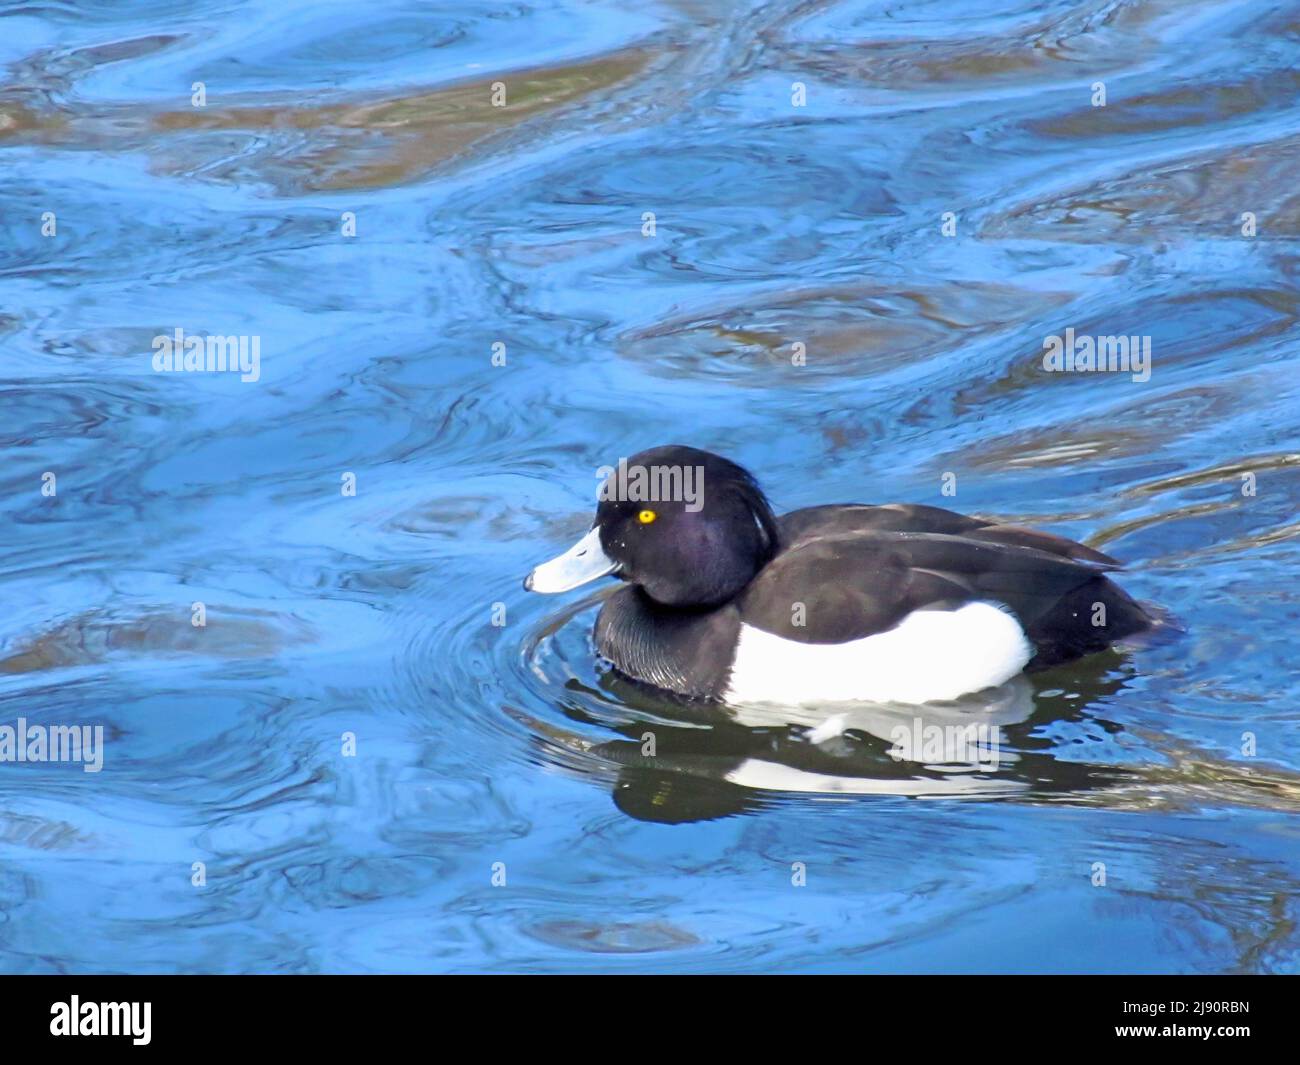 A male tufted duck, Aythya Fuligula, swimming in a lake in Southern England with both the duck and the blue sky reflecting in the water Stock Photo